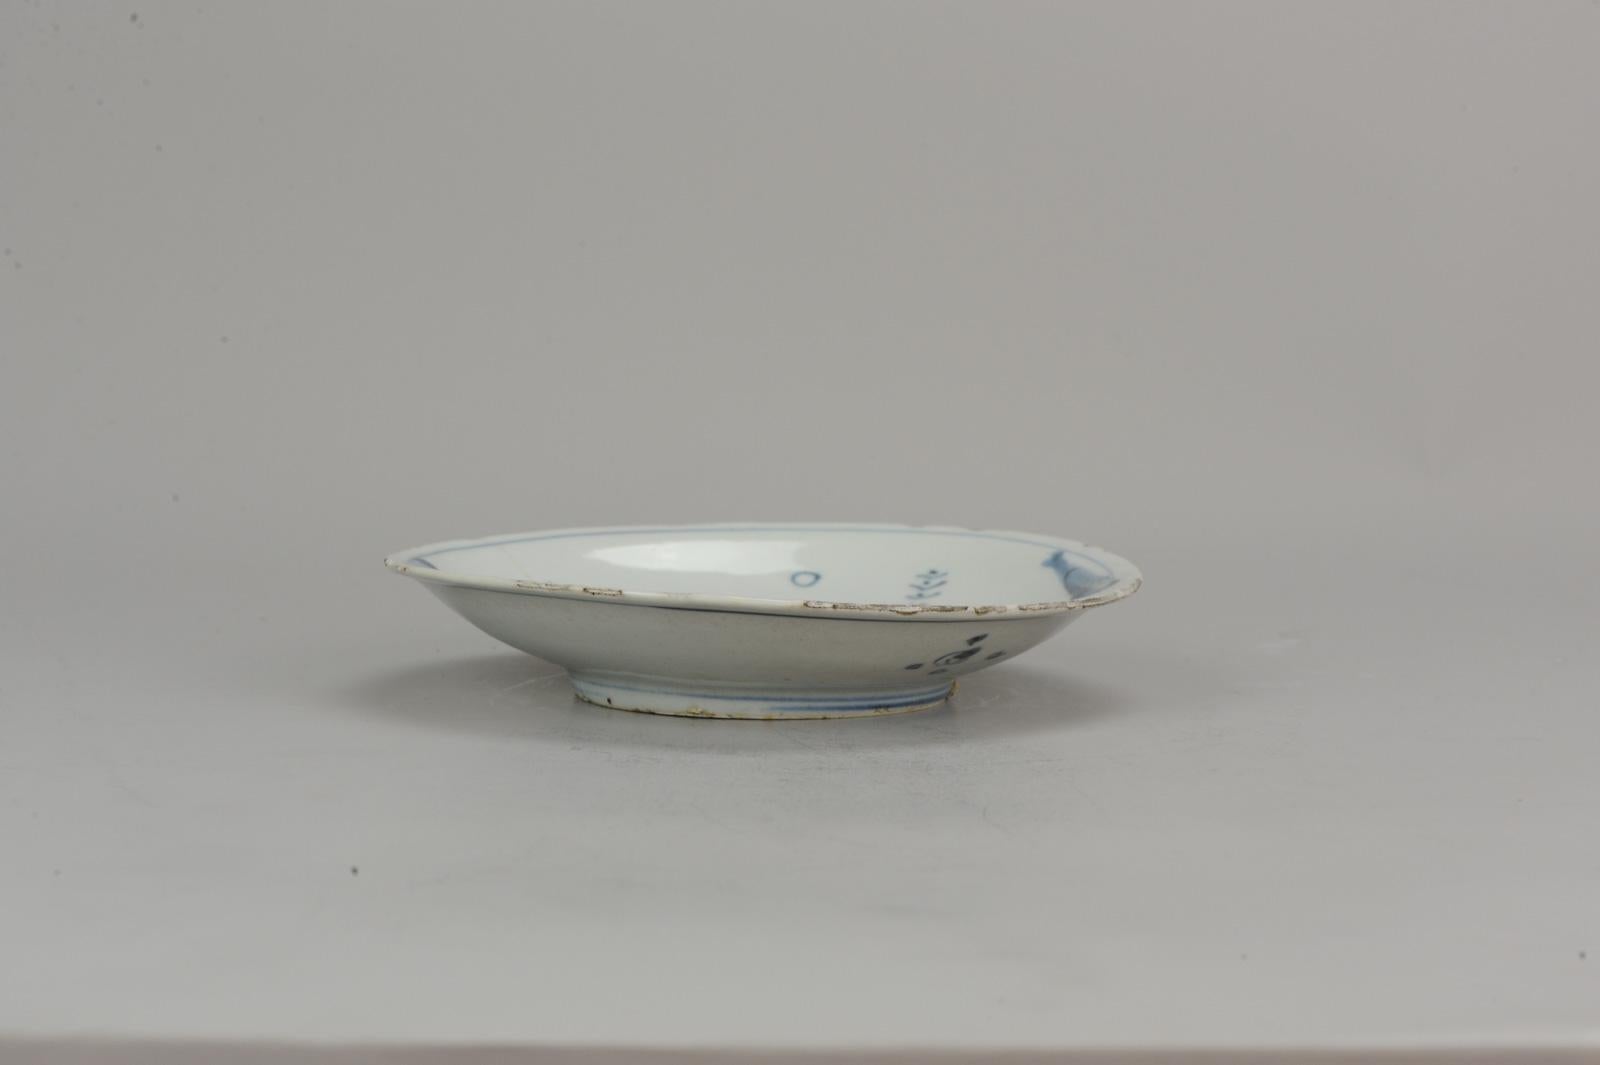 A very nicely decorated plate with a rare version of a scene of a scholar and attendant reaching a city.

Reference;
Trade Taste and Transformation: Jingdezhen Porcelain for Japan, 1620 - 1645 by Julia B. Curtis, page 95
